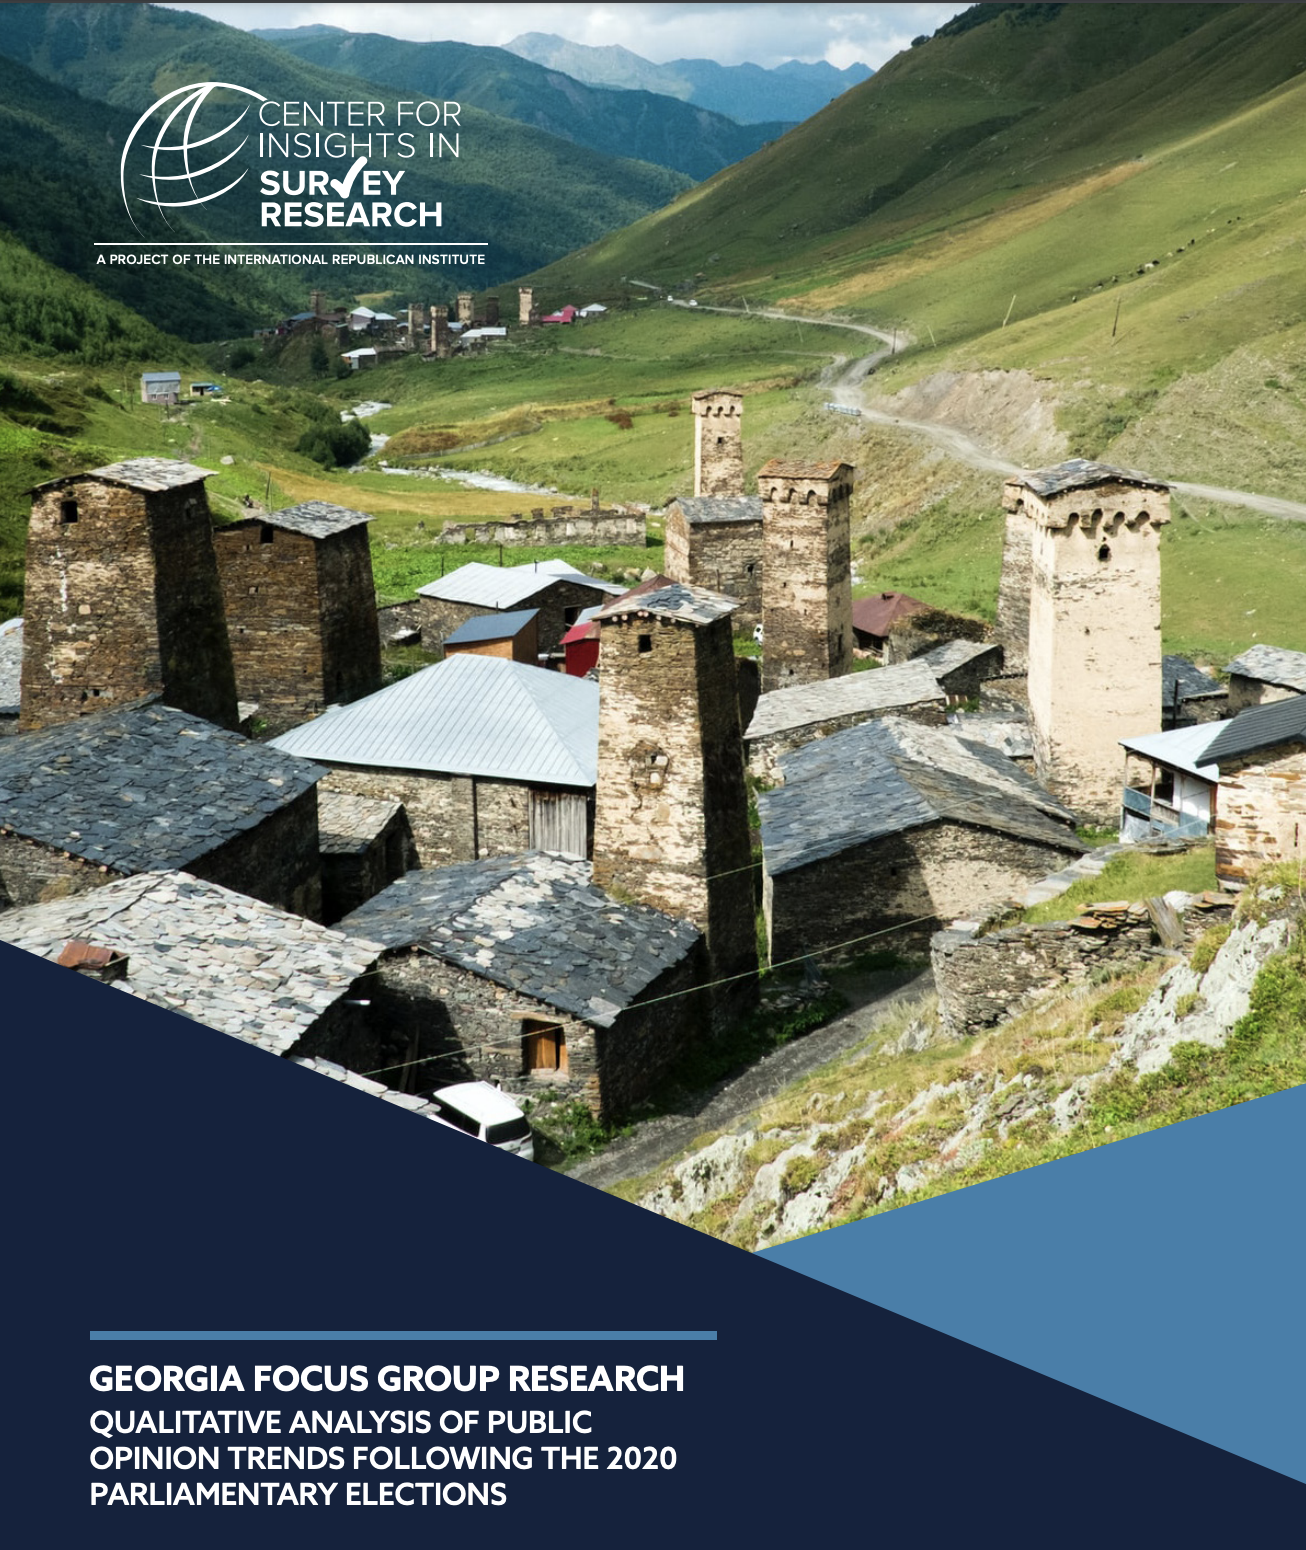 GEORGIA FOCUS GROUP RESEARCH QUALITATIVE ANALYSIS OF PUBLIC OPINION TRENDS FOLLOWING THE 2020 PARLIAMENTARY ELECTIONS